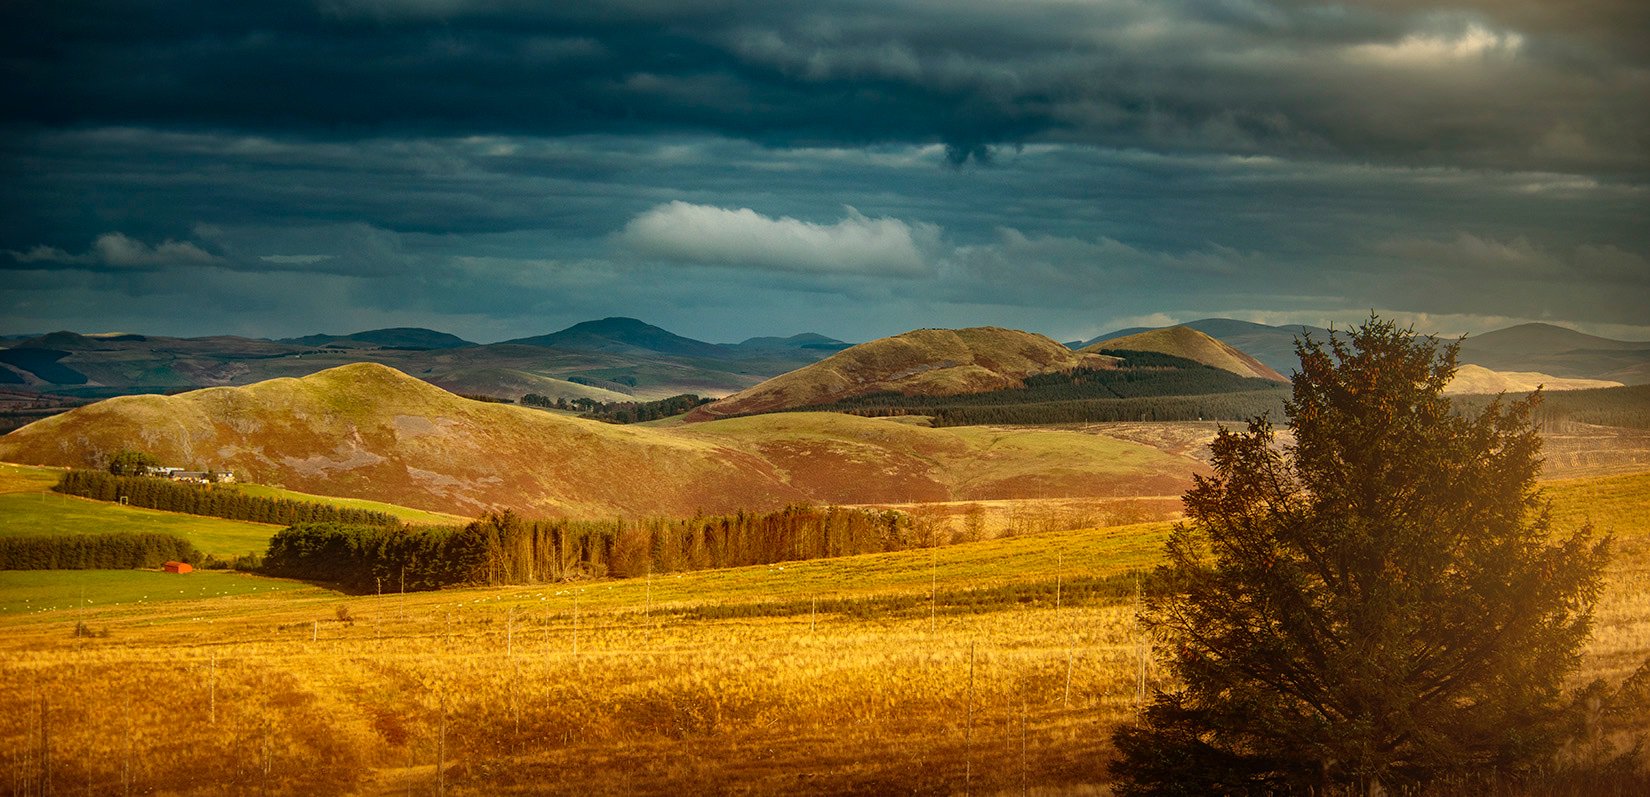 Border Hills. Looking into Scotland from Carter Bar by Mackenzie King Photography @amkingphoto